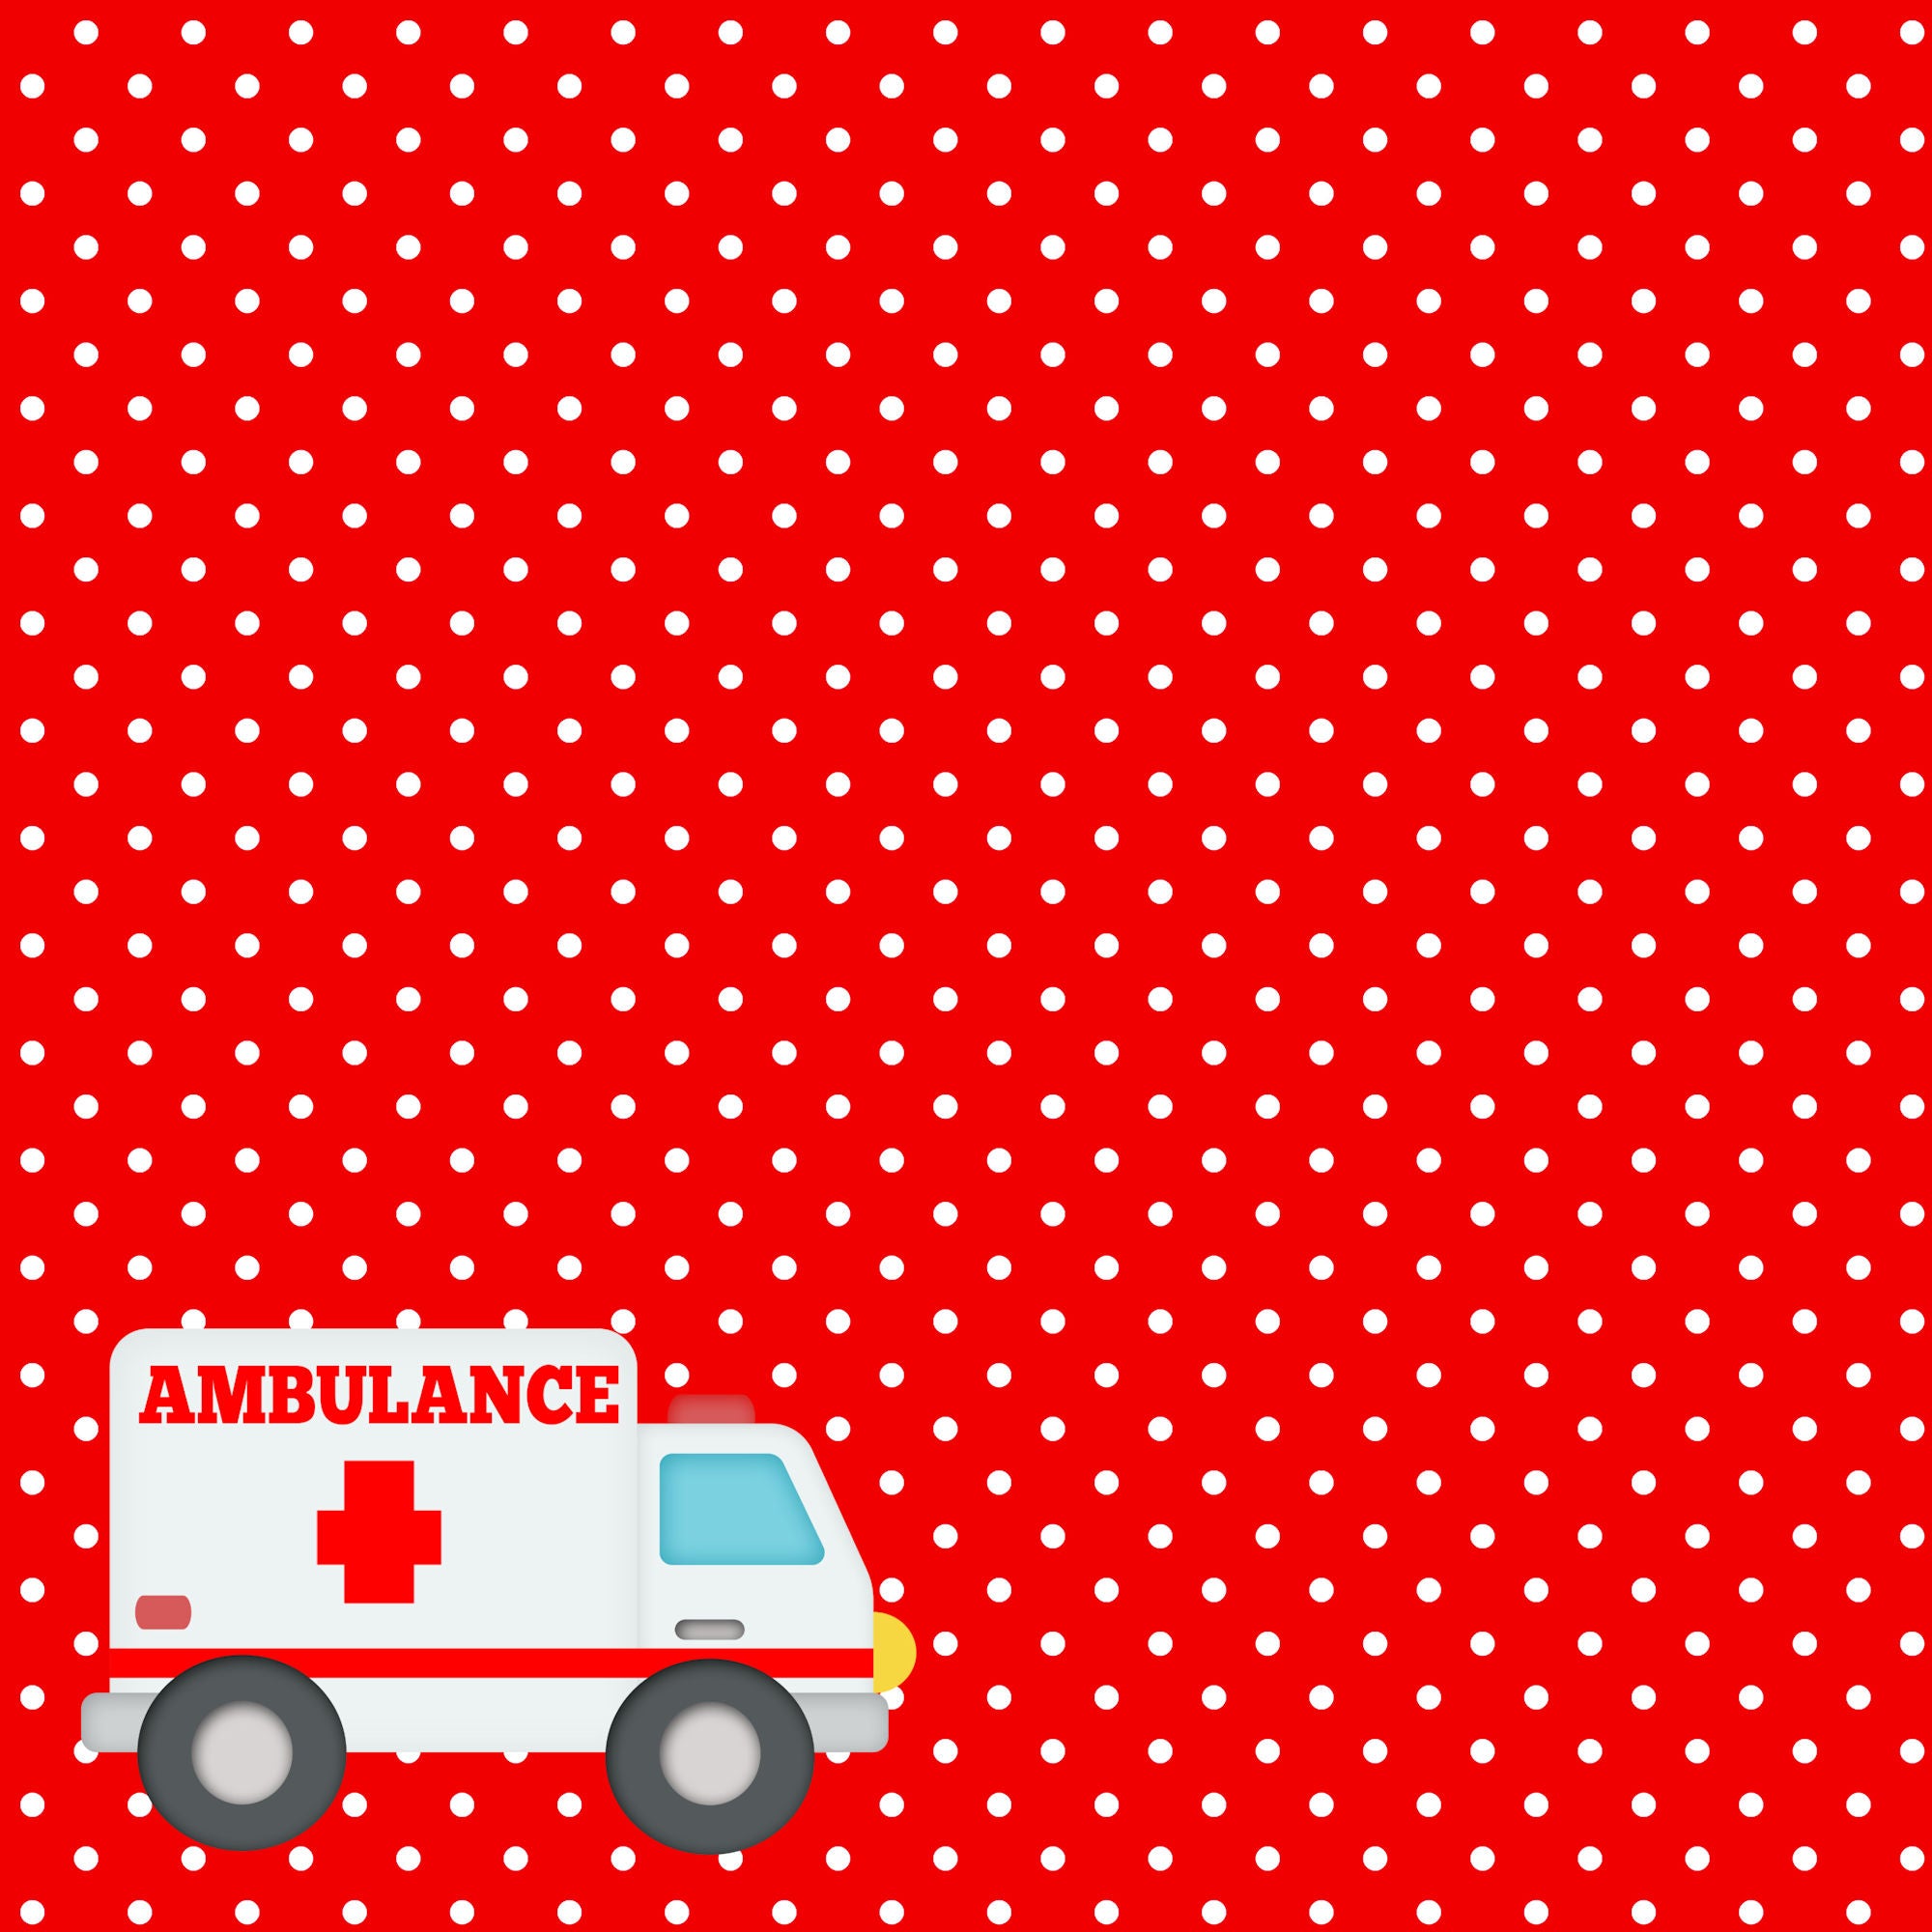 Doctor's Orders Collection Ambulance Ride 12 x 12 Double-Sided Scrapbook Paper by SSC Designs